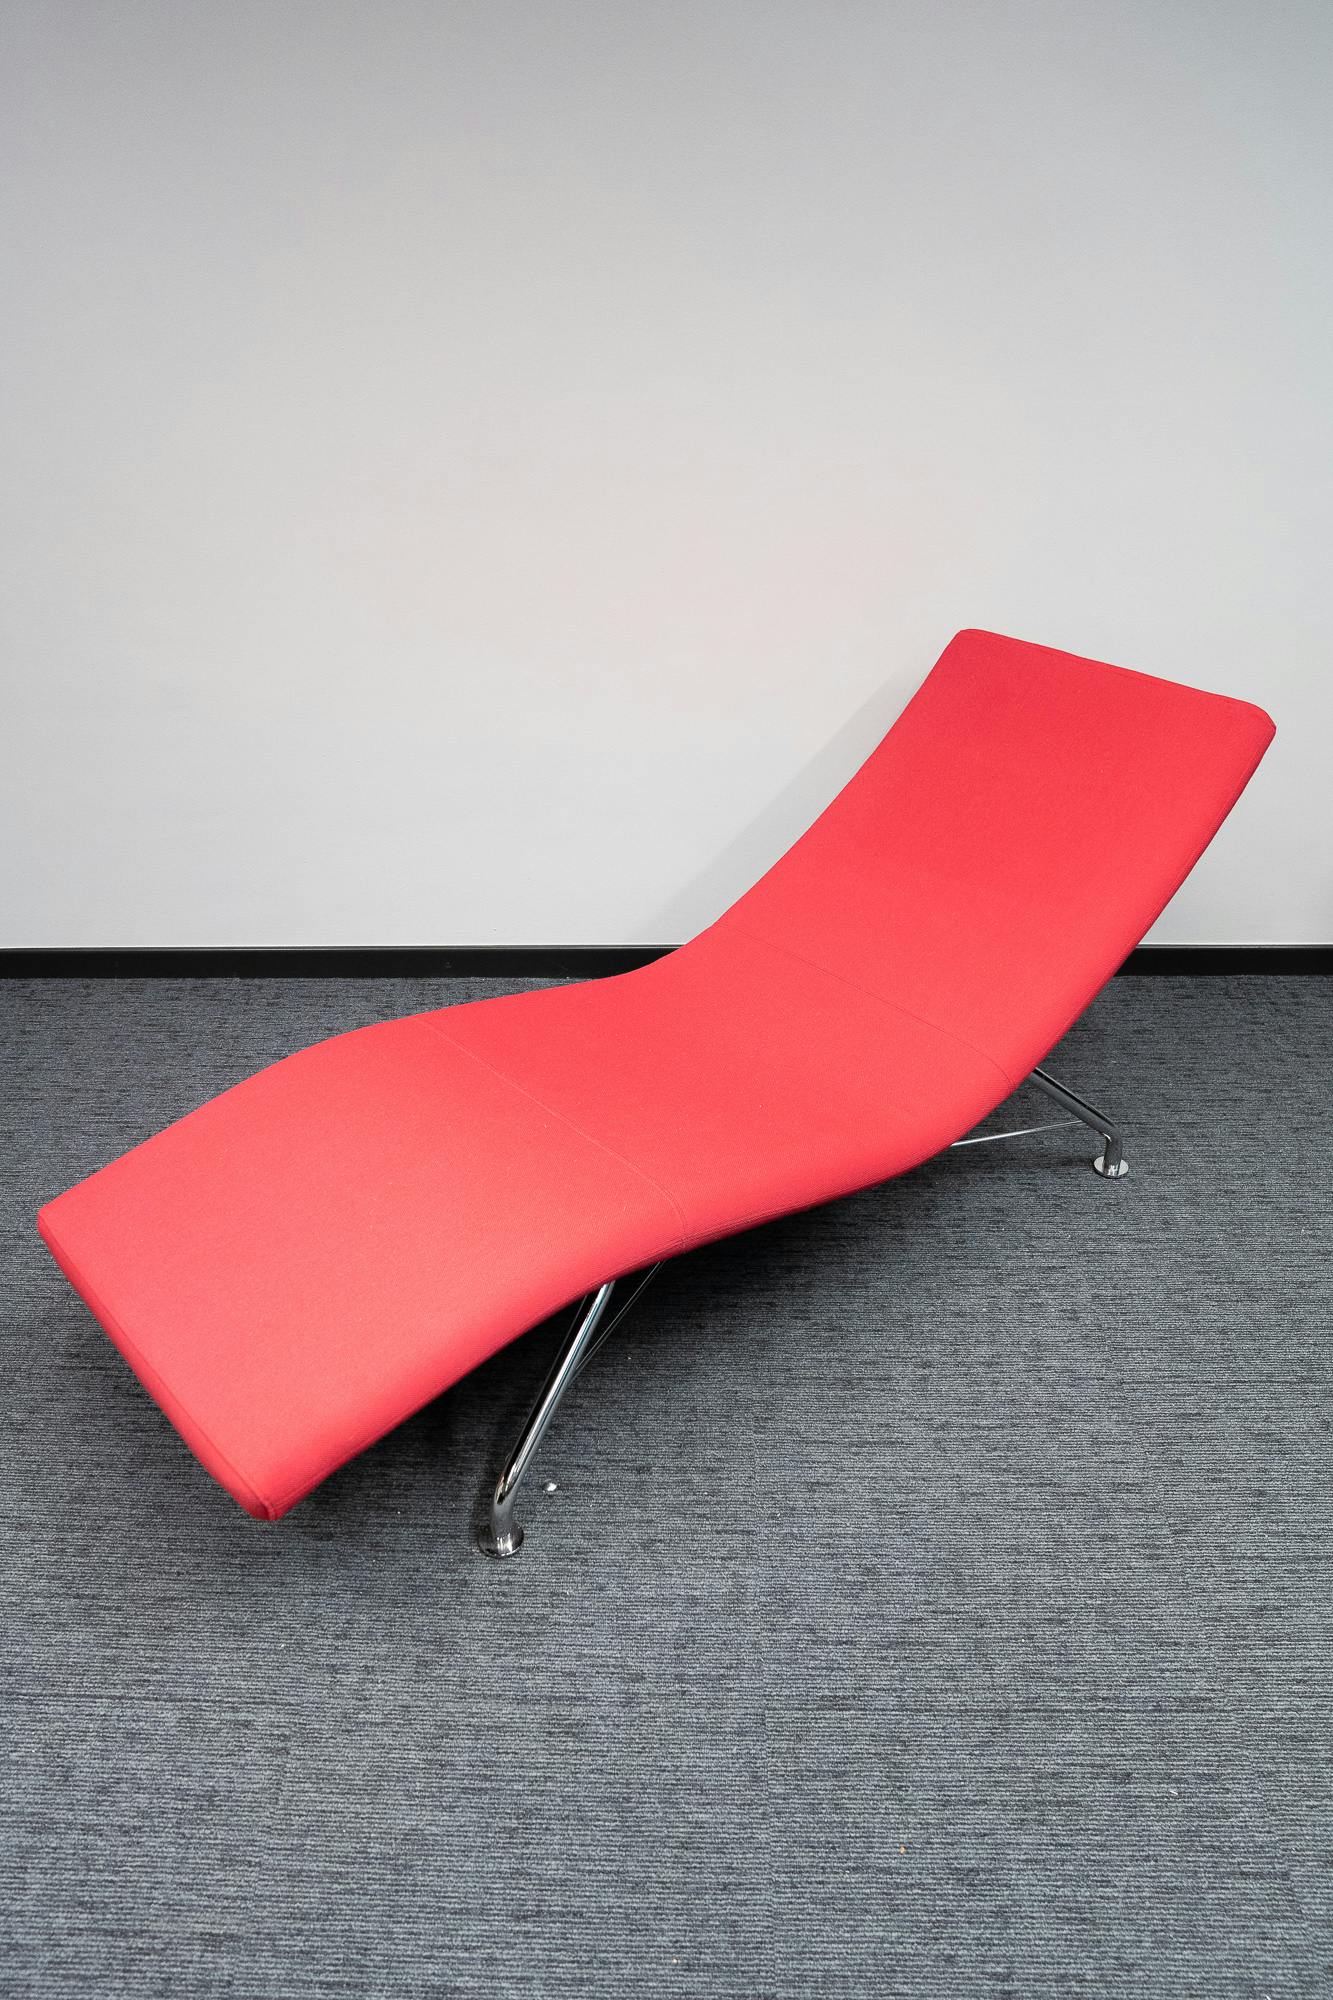 Sense red chaise longue from Softline - Relieve Furniture